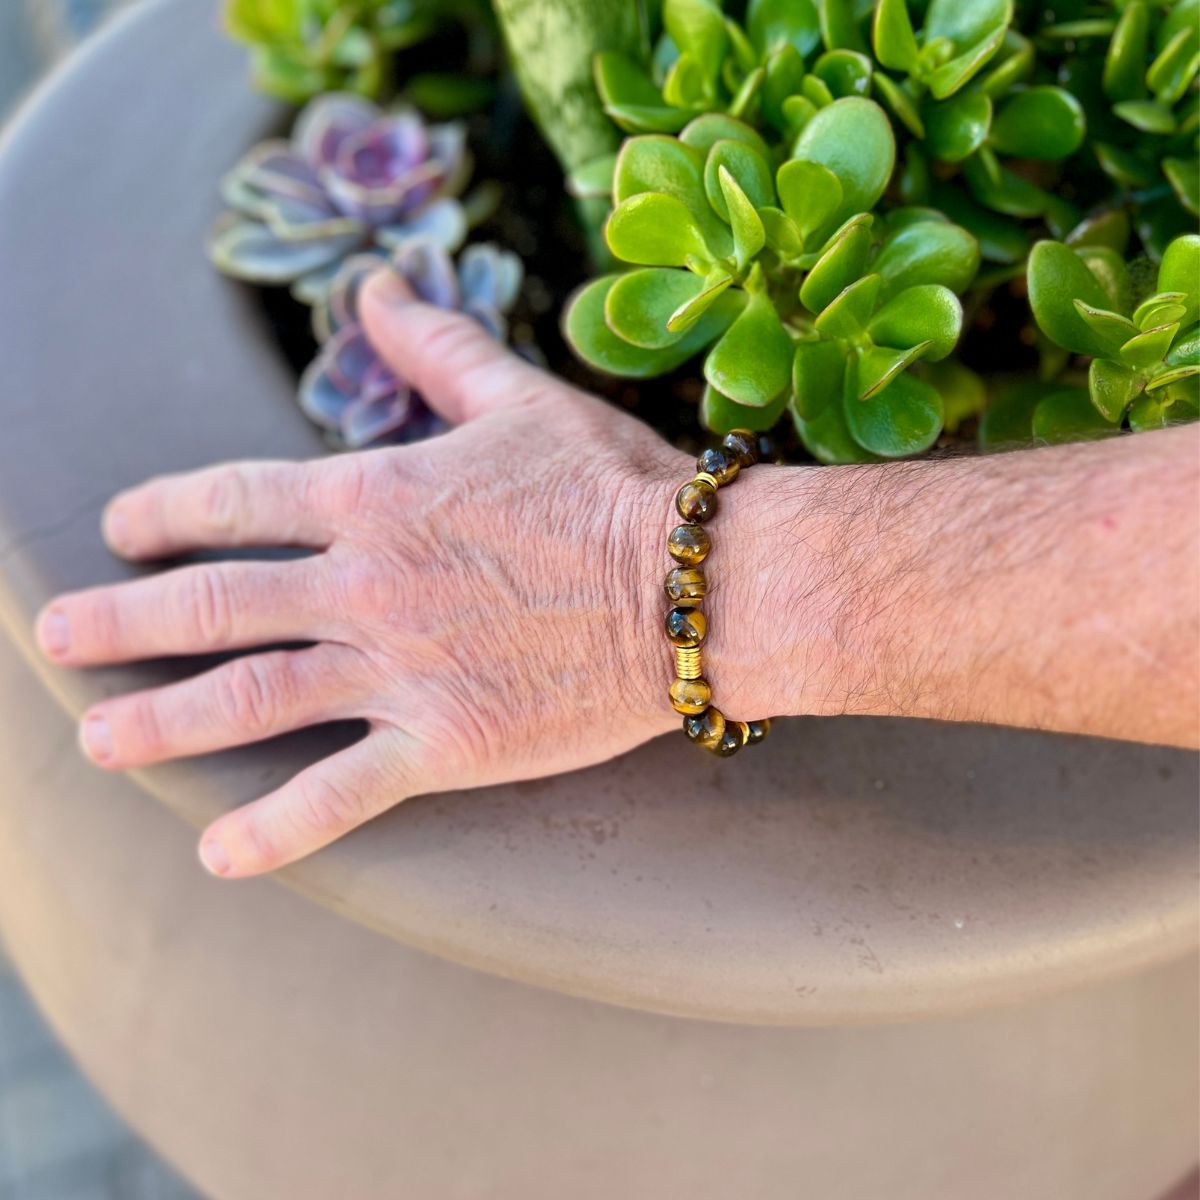 The "Leader of Courage" name encapsulates the essence of this bracelet, inviting you to embrace the leadership qualities of courage, wisdom, and determination. Wear it with pride as a reminder of your inner strength and the unwavering courage to face life's journey with resilience and grace.